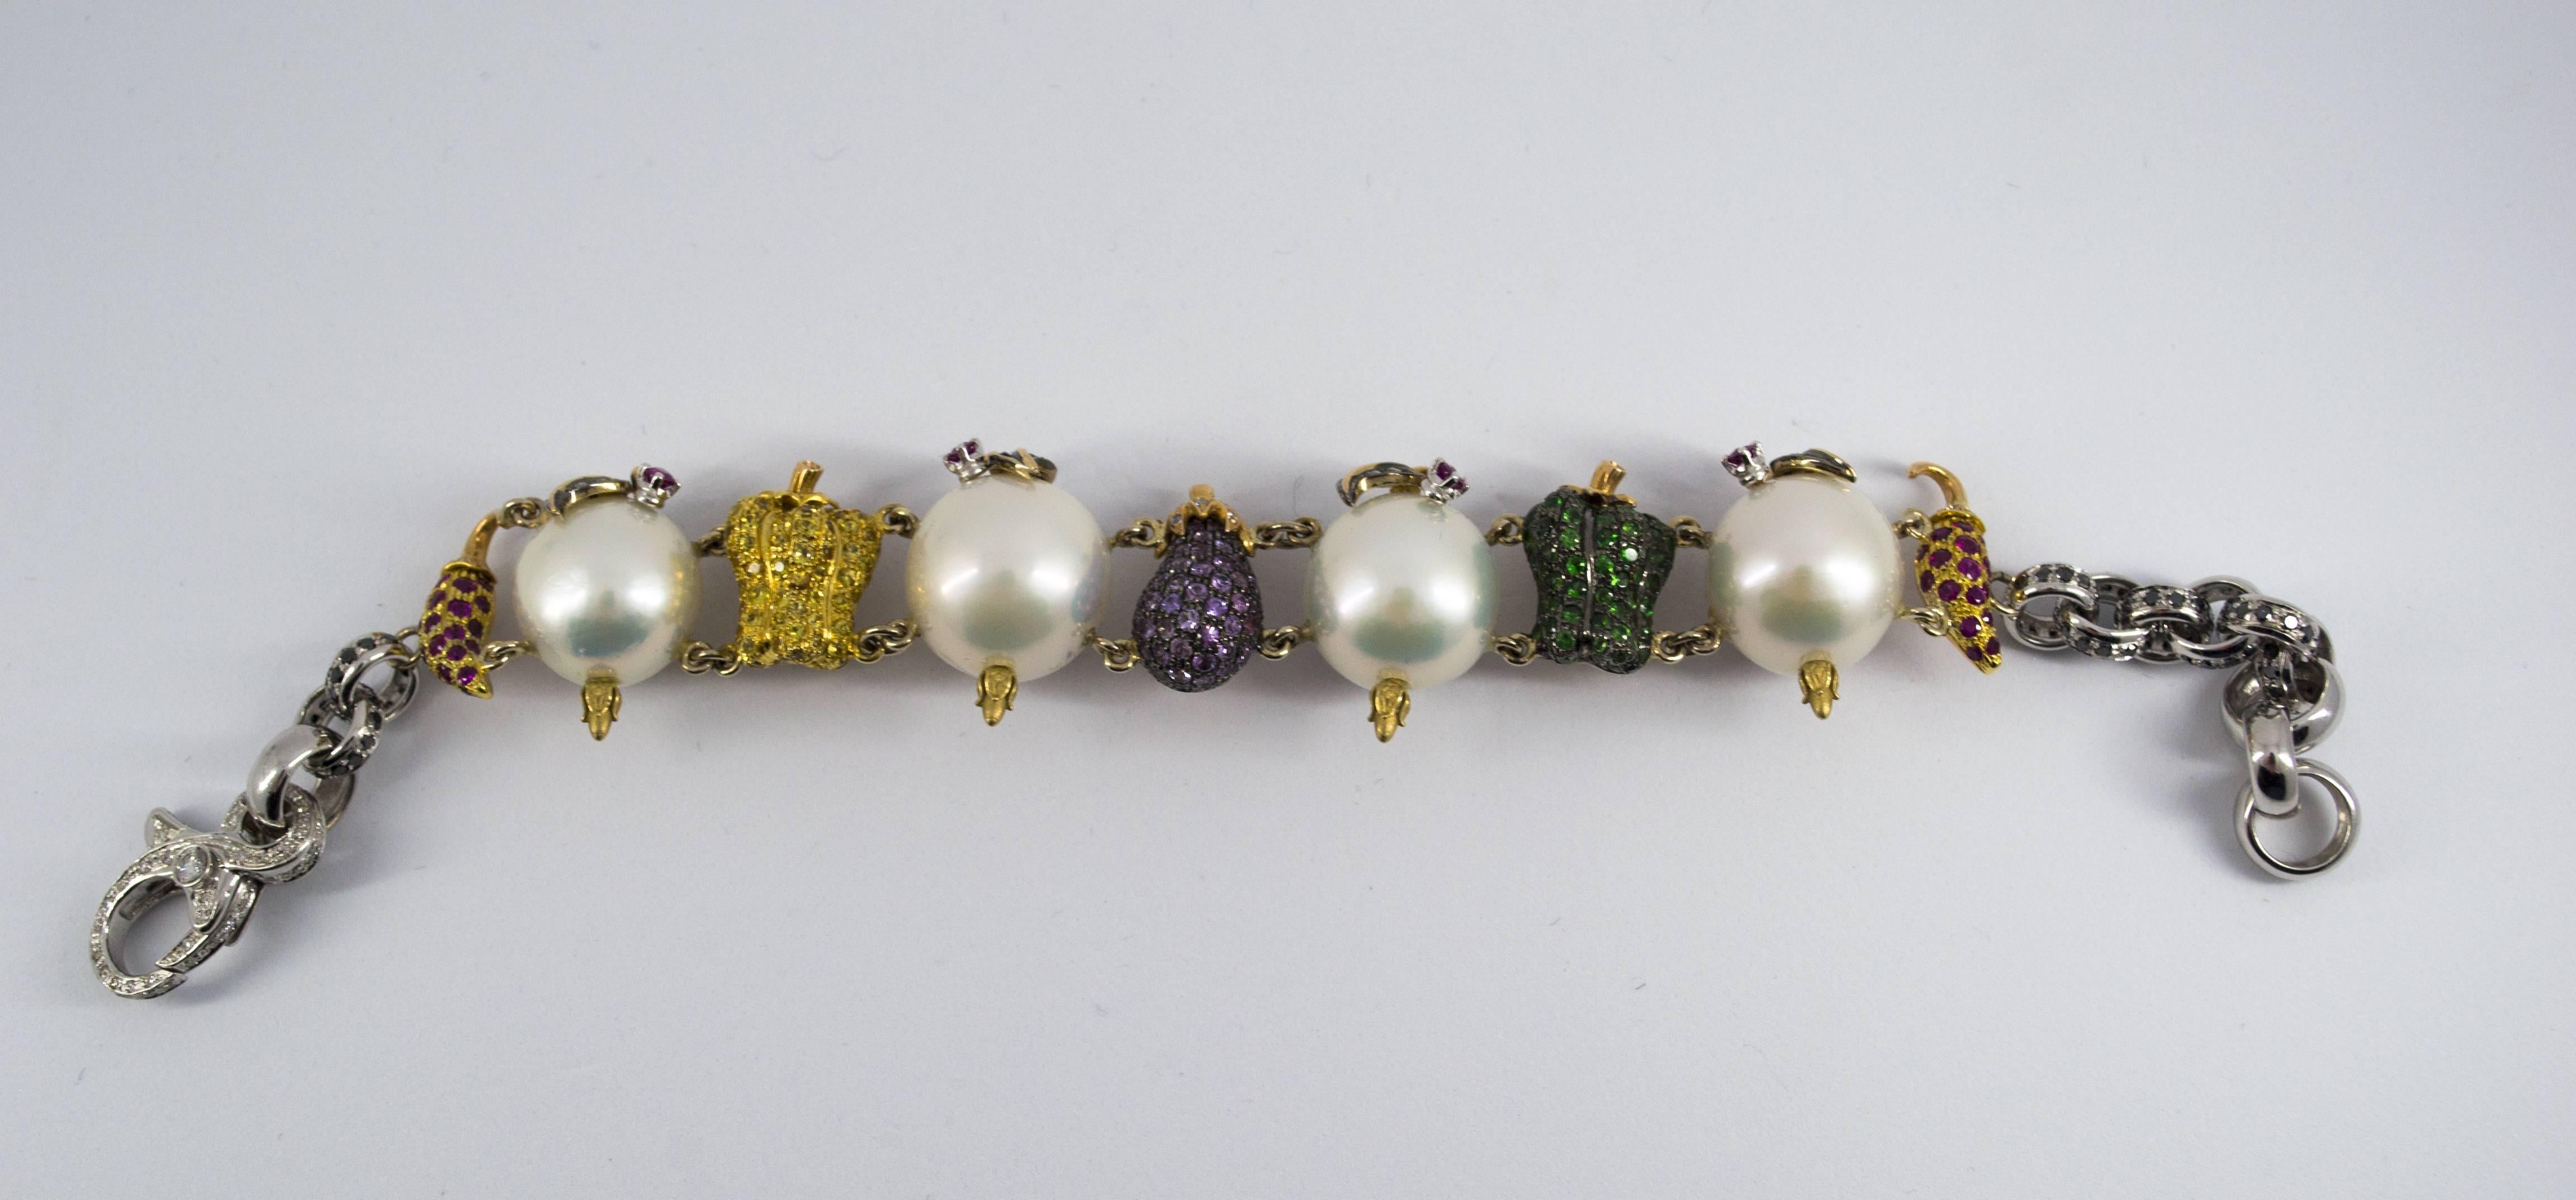 This Bracelet is made of 18K White and Yellow Gold.
This Bracelet has 0.85 Carats of Diamonds.
This Bracelet has 5.50 Carats of Peridots, Rubies, Yellow Sapphires.
This Bracelet has also Pearl.
We're a workshop so every piece is handmade,